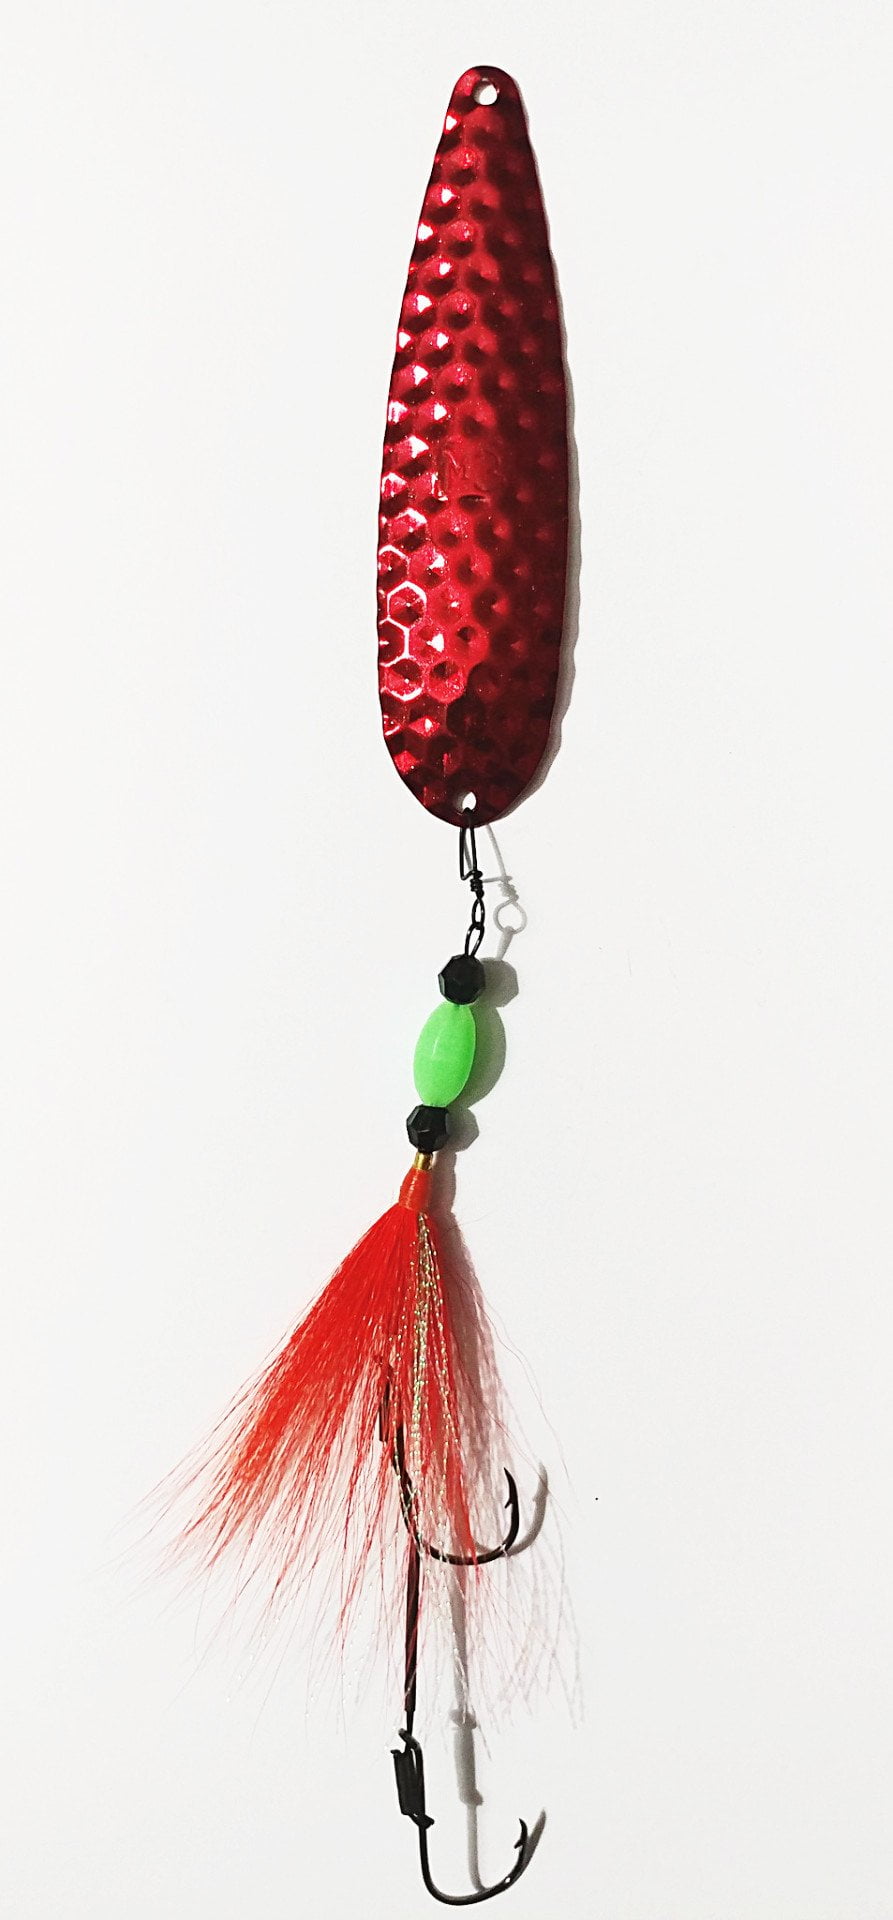 "Metallic Red" 4.75 Fully Rigged - M3Tackle 